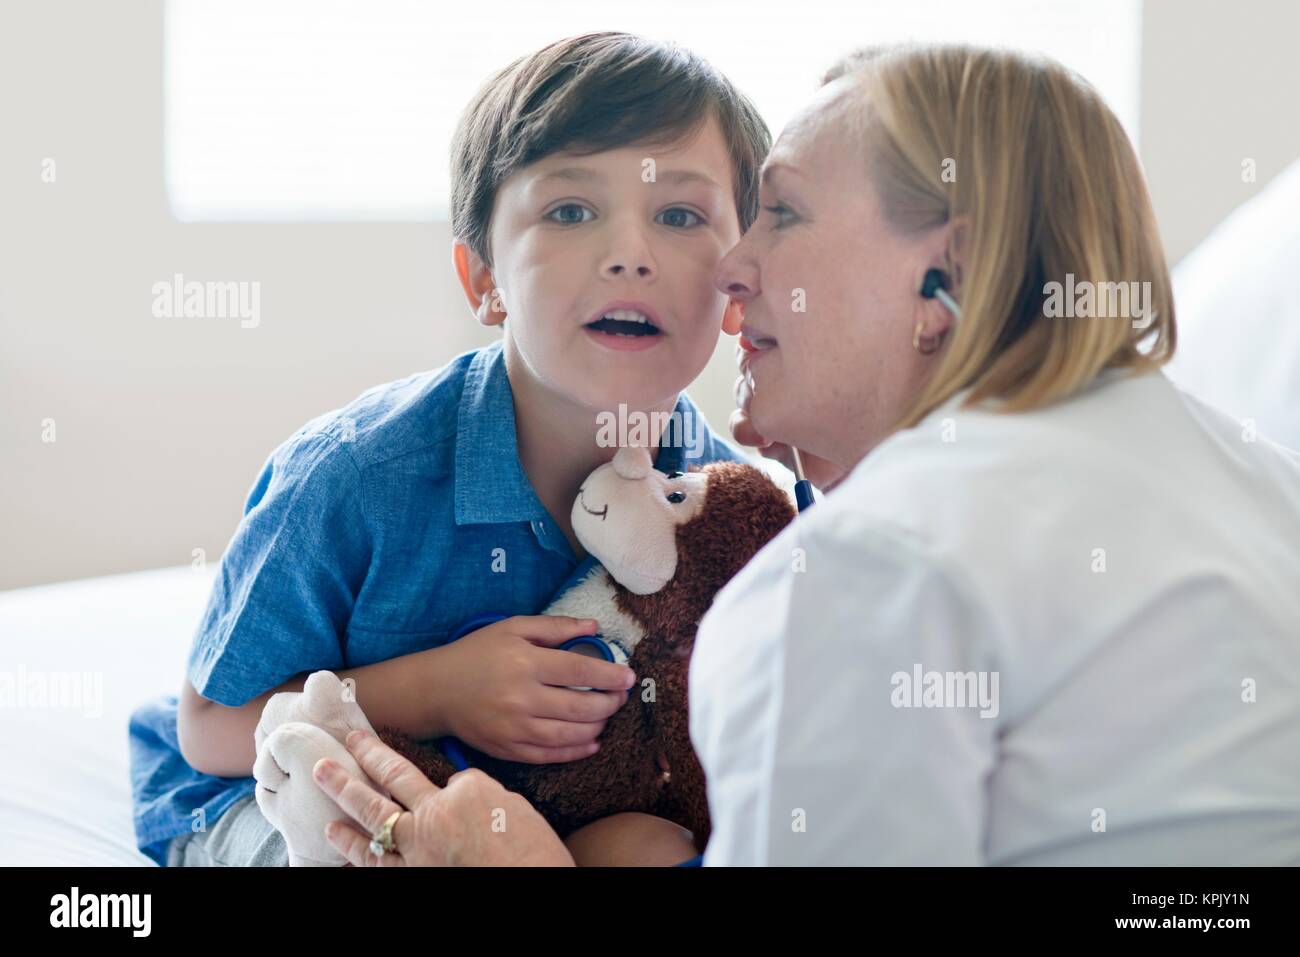 Young boy and nurse listening to stethoscope. Stock Photo